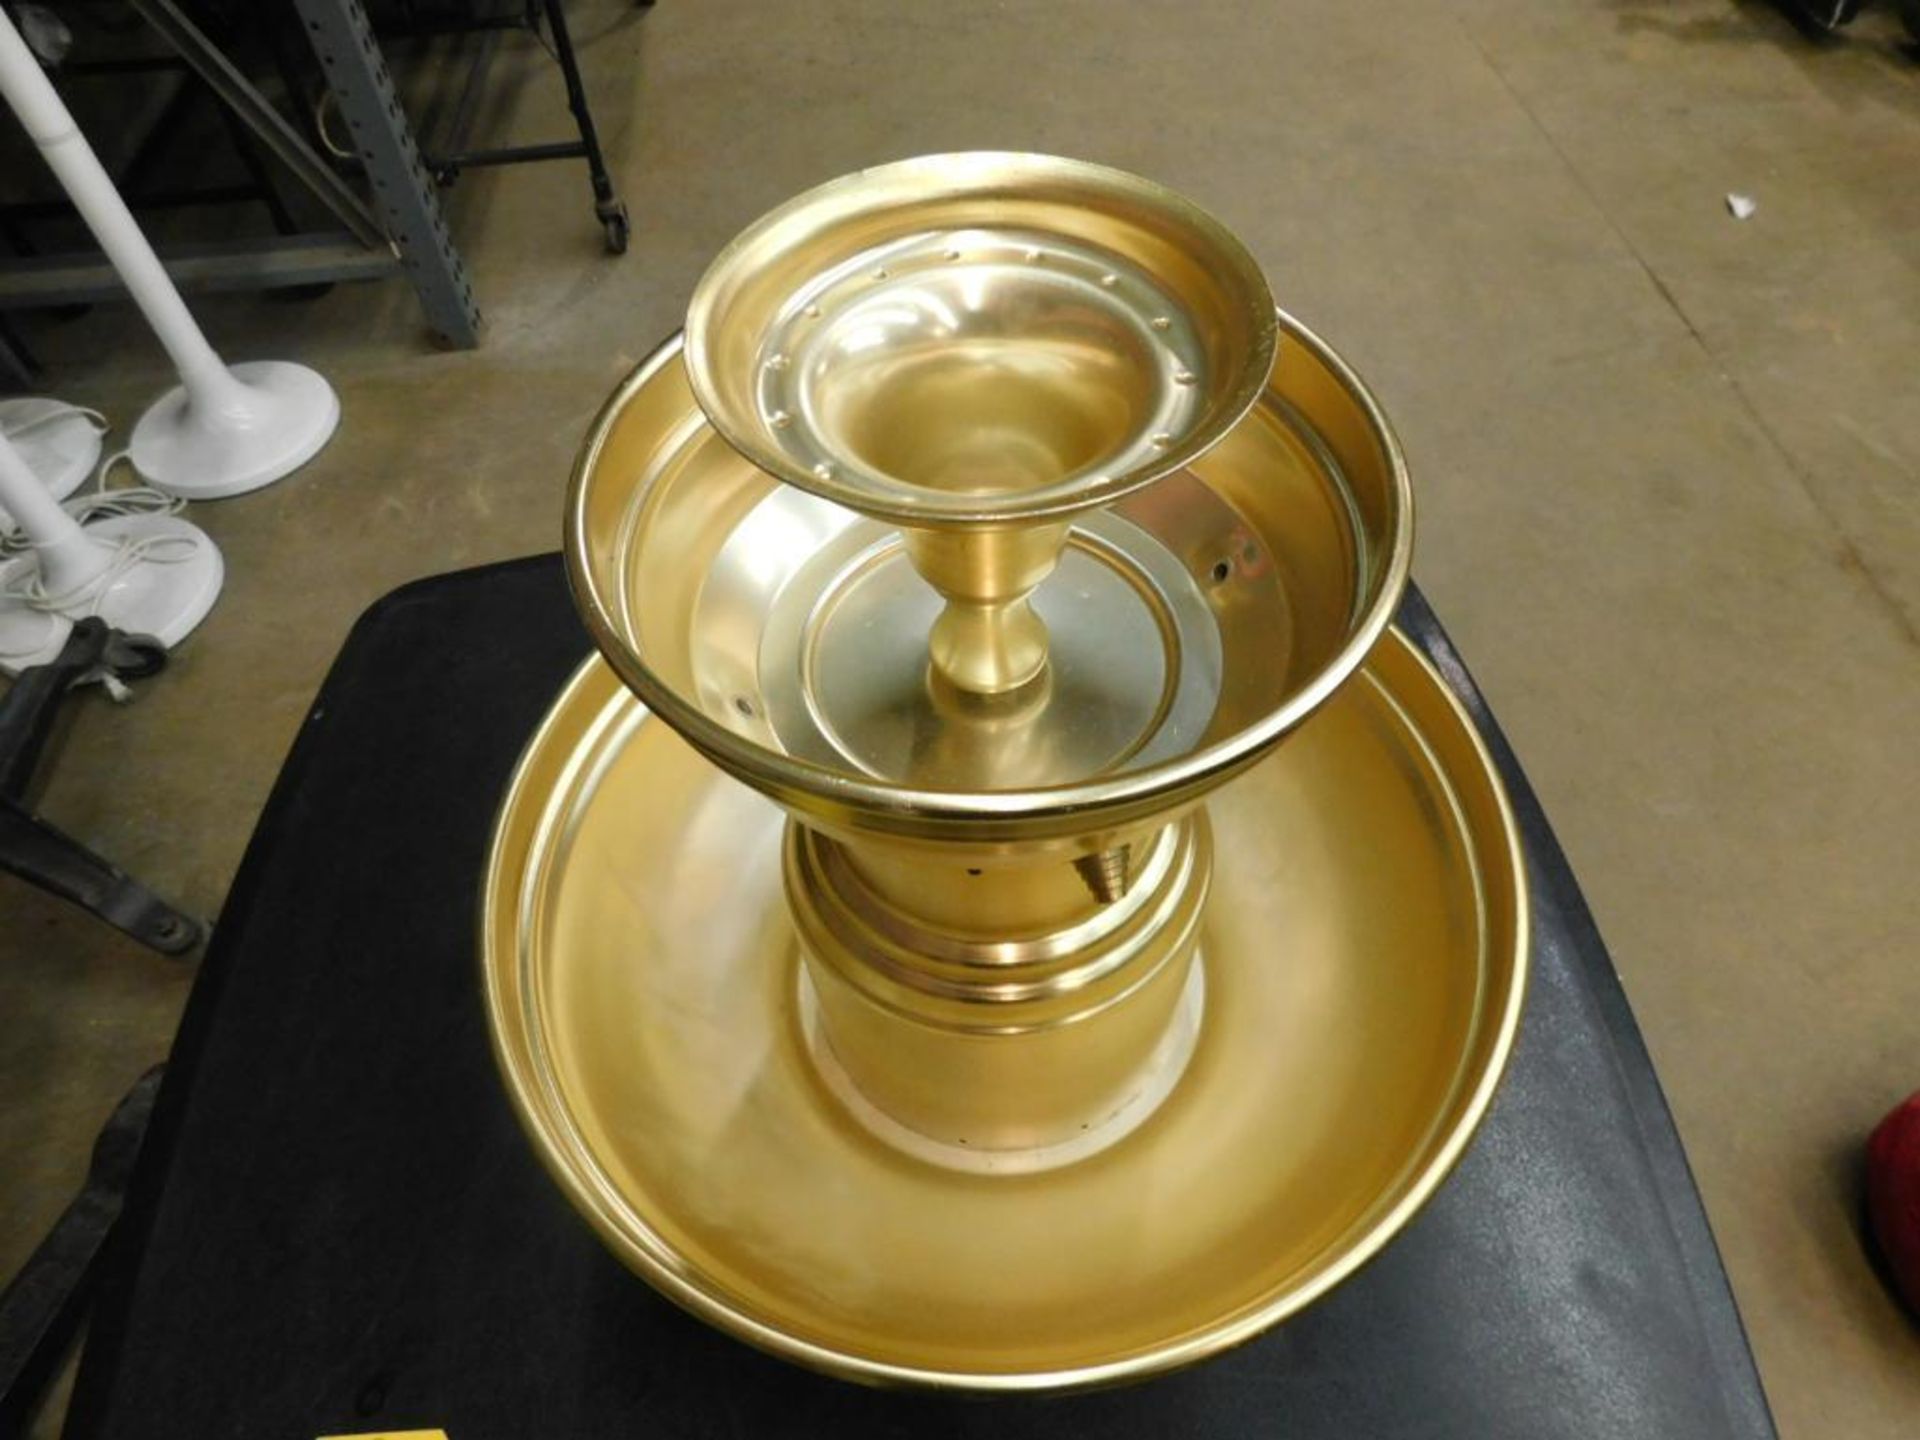 Apex Gold Plated Champagne Fountain, 3-Gallon (LOCATION: 1766 Waukegan Rd., Glenview, IL 60025) - Image 2 of 2